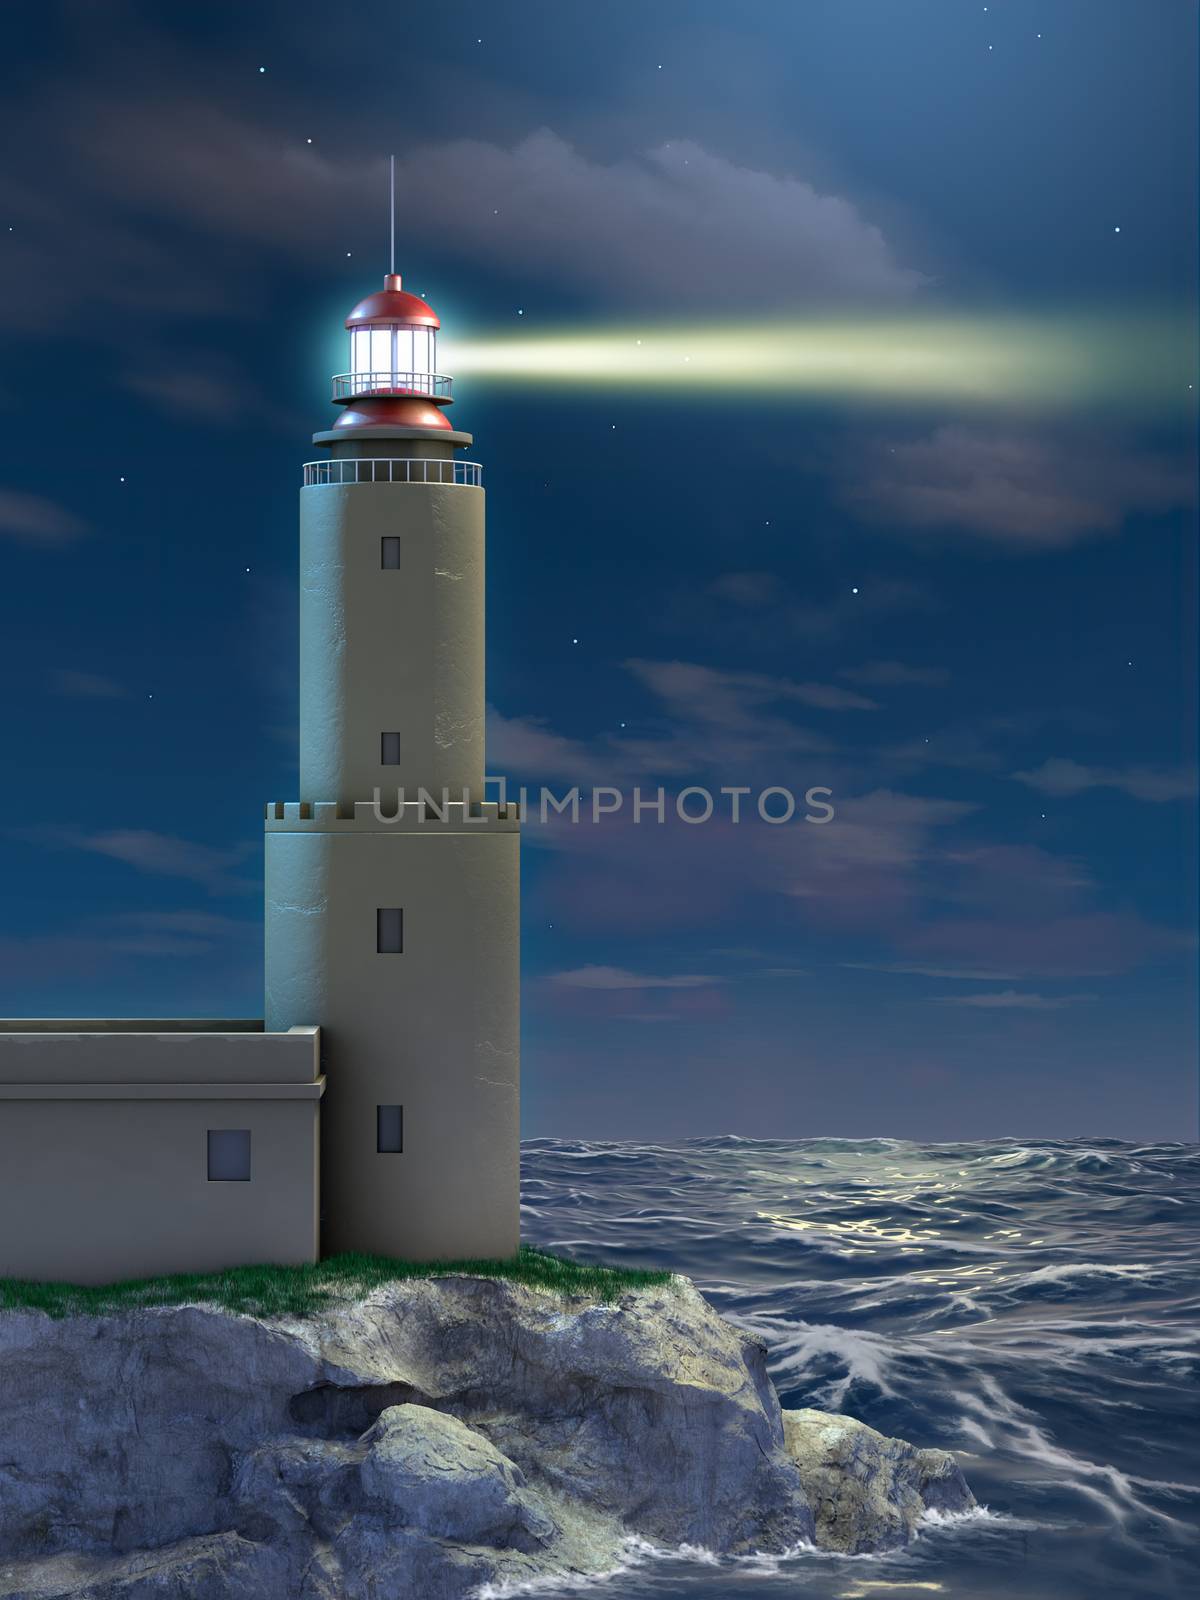 Lighthouse at night by Andreus